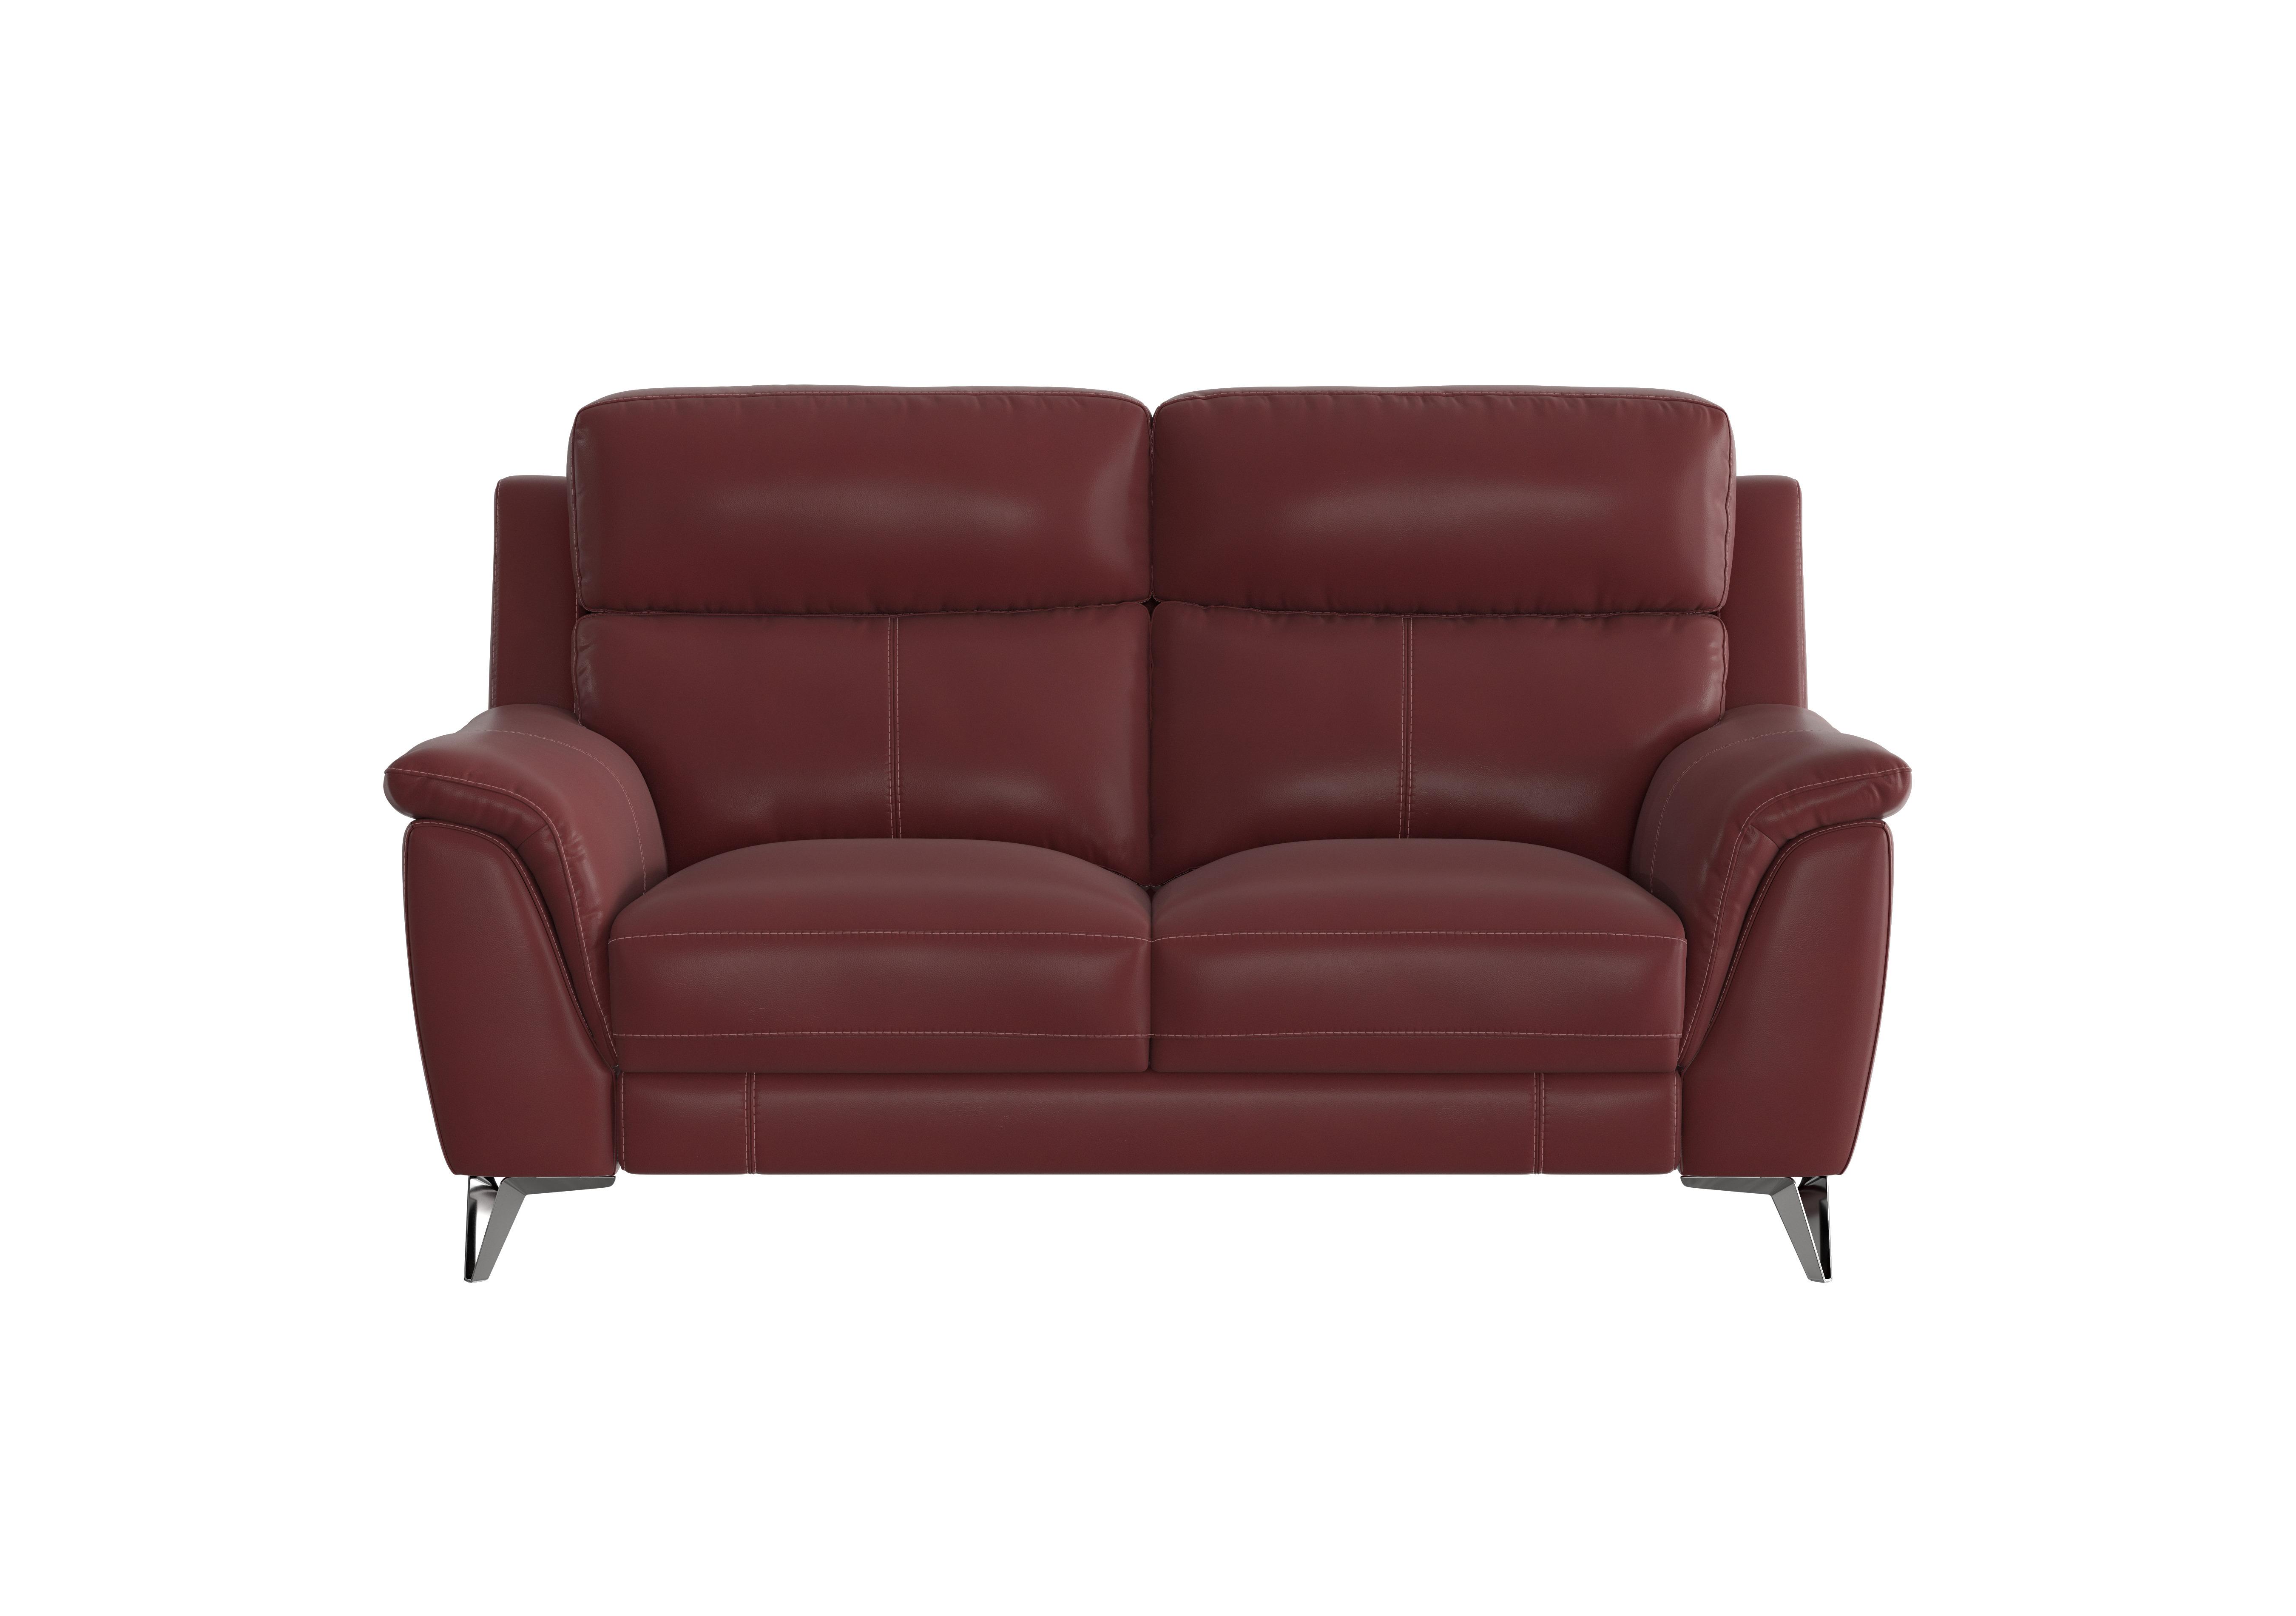 Contempo 2 Seater Leather Sofa in Bv-035c Deep Red on Furniture Village